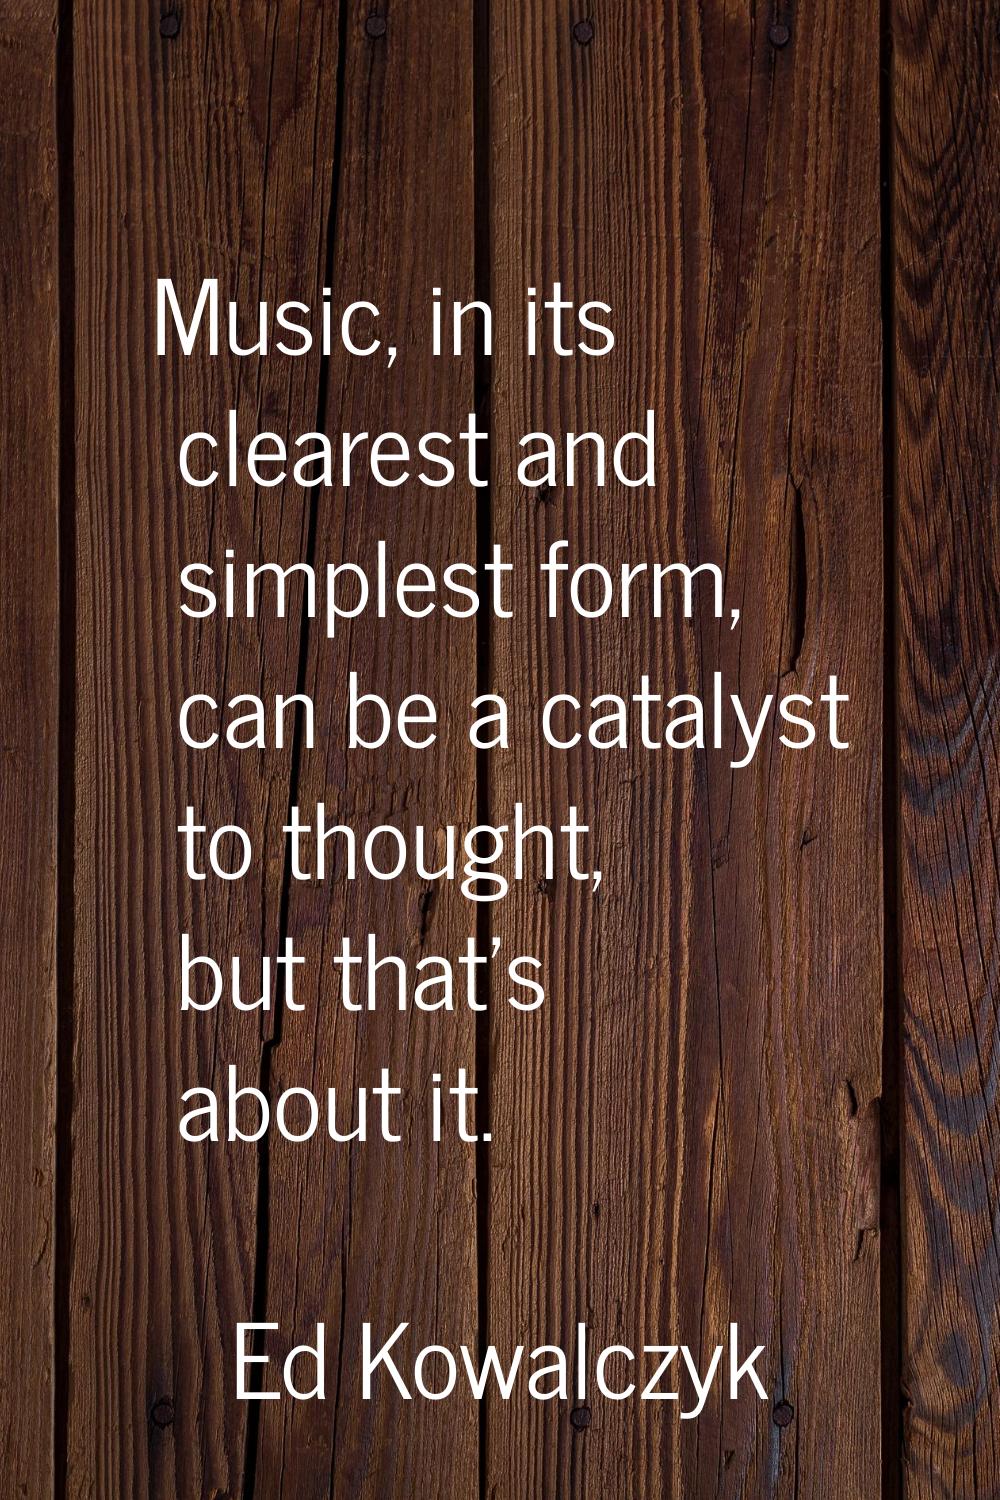 Music, in its clearest and simplest form, can be a catalyst to thought, but that's about it.